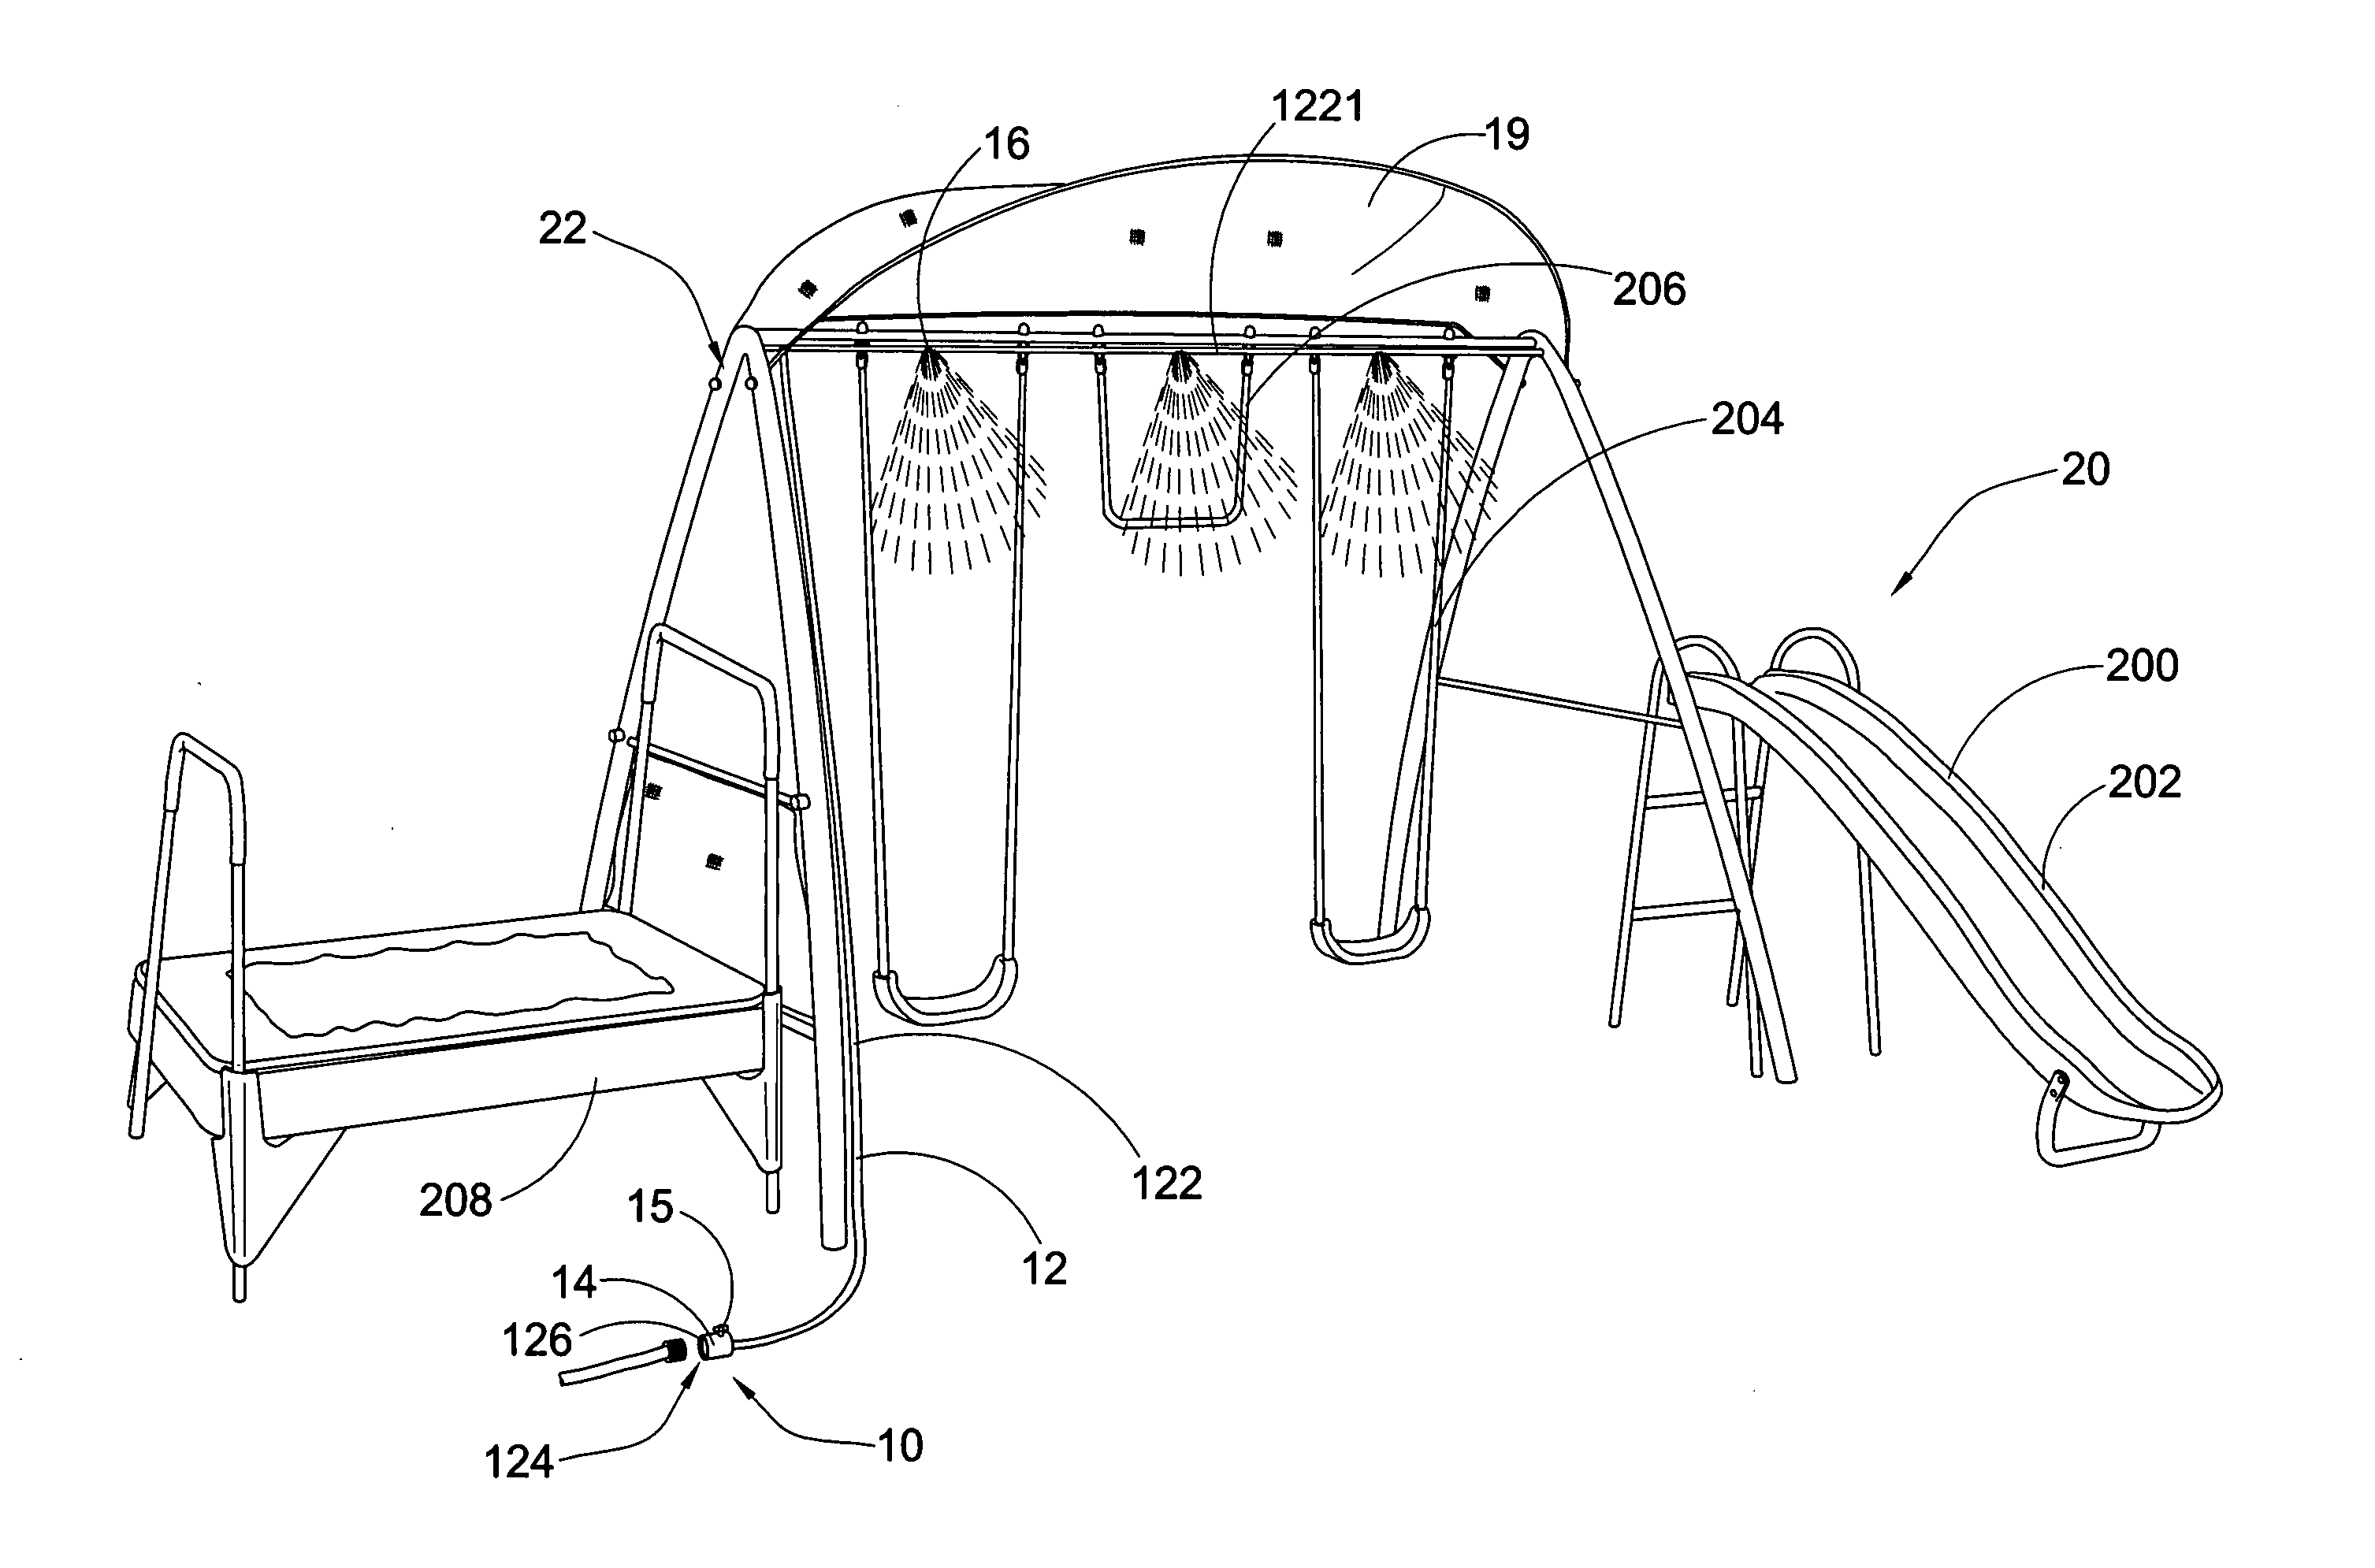 Mist producing device for playground with sun shade apparatus